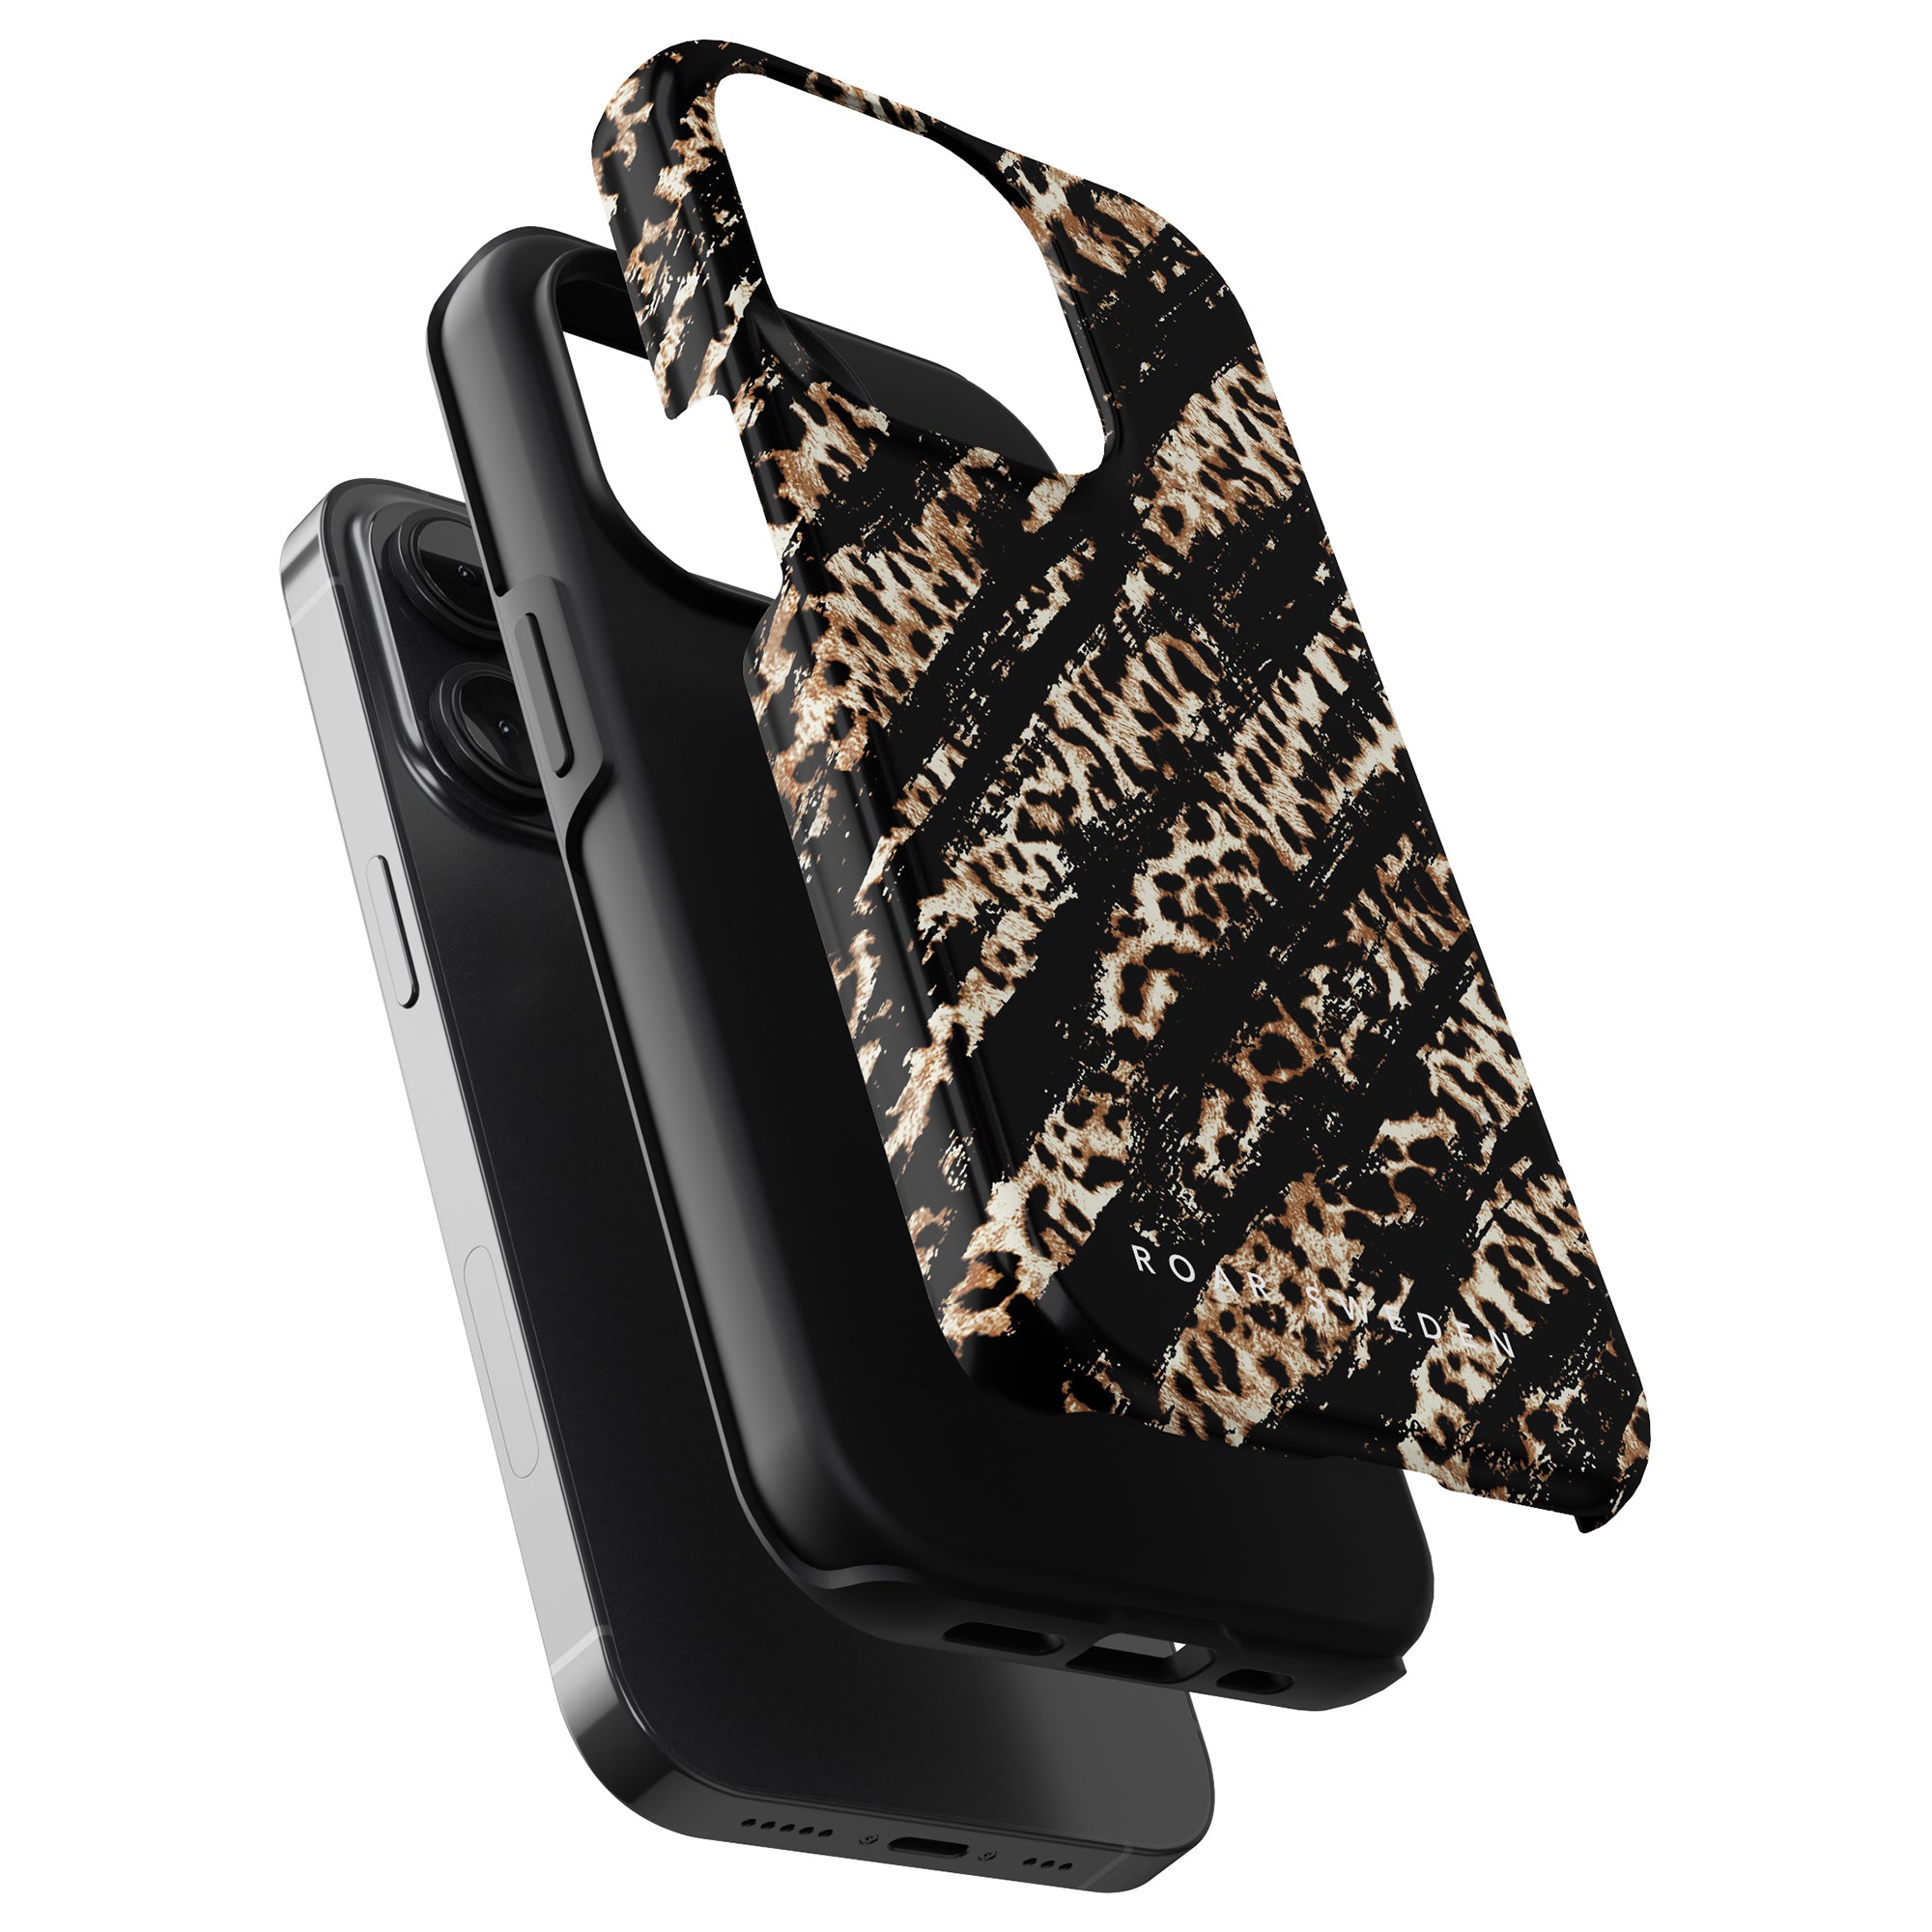 Black smartphone with a Claws - Tough Case featuring a stylized, leopard print design, displayed from various angles to highlight the fit and aesthetics.